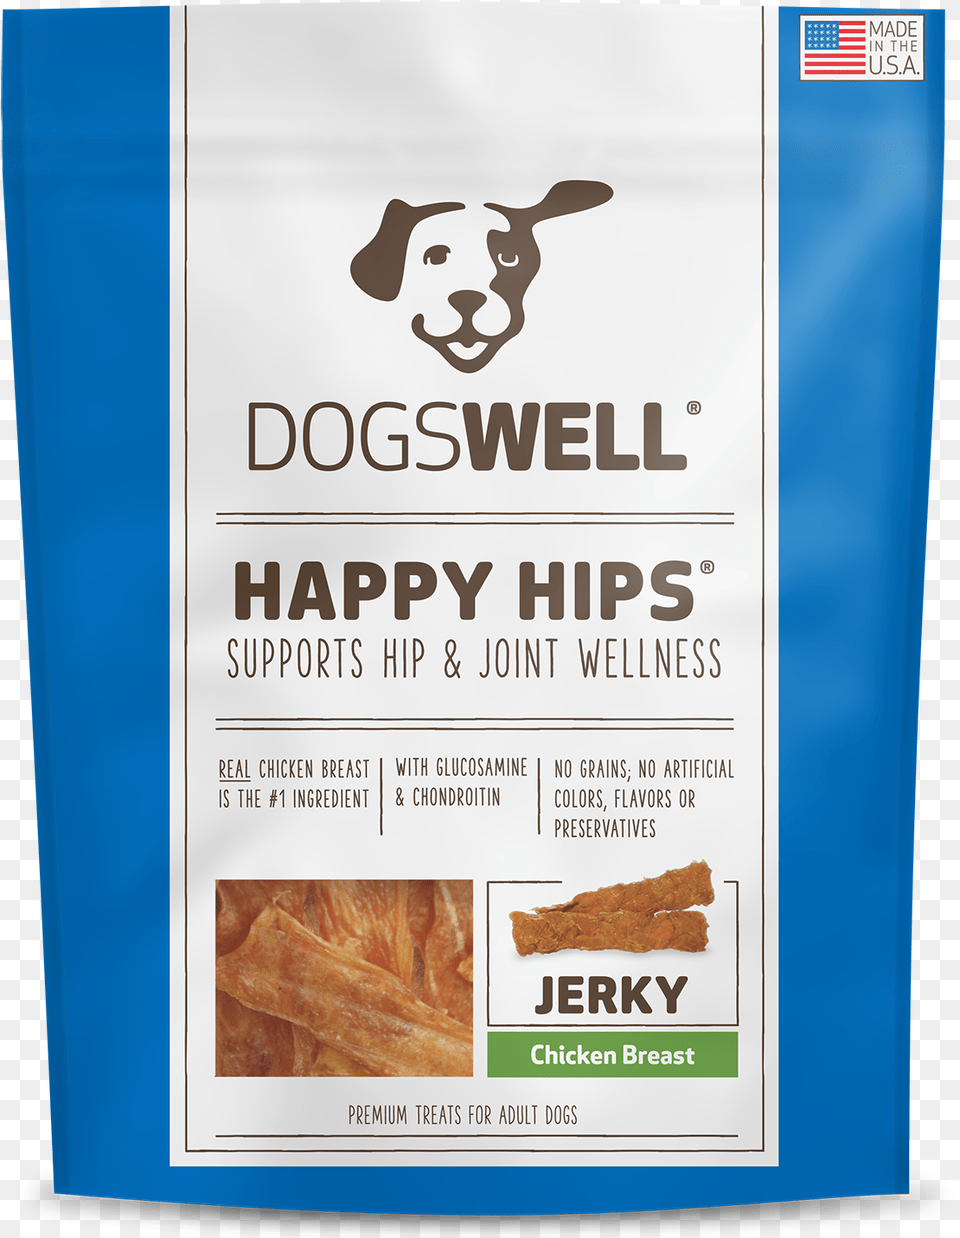 Dogswell Happy Hips Chicken Breast Jerky Dogswell, Advertisement, Poster, Food, Meat Png